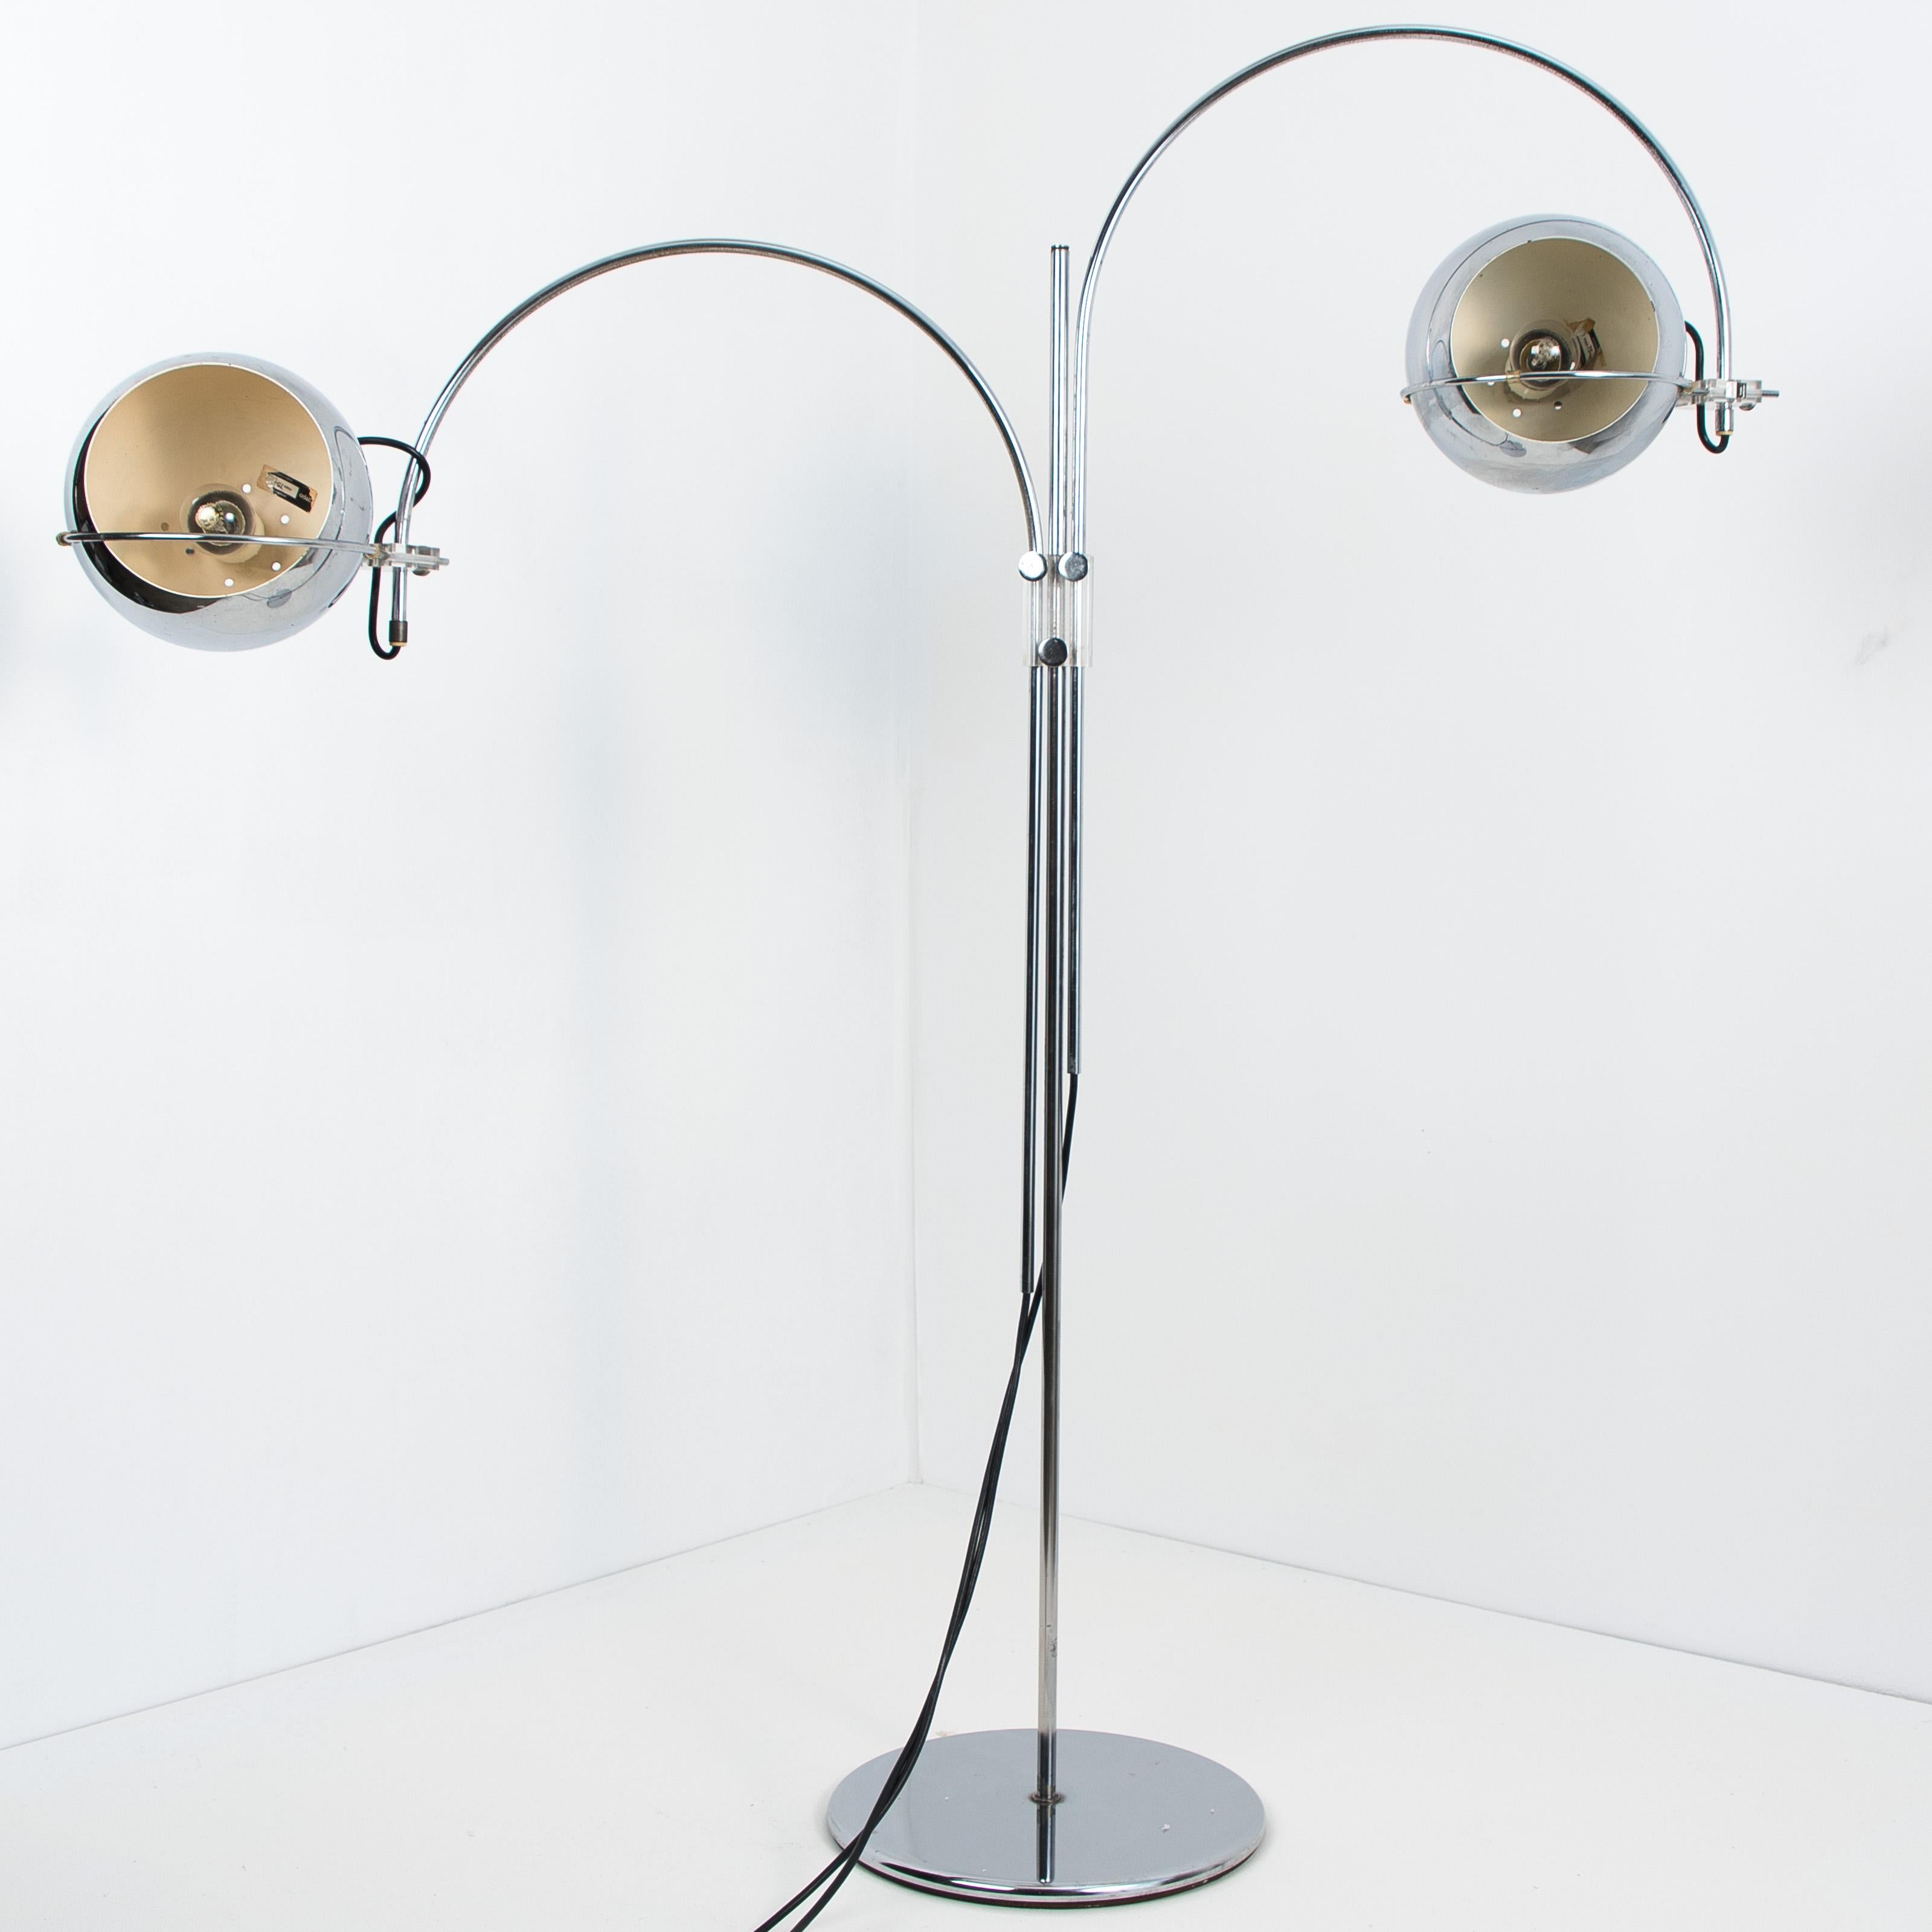 Metal Set of Dutch Chrome Light Fixtures from Gepo, Double Eye-Ball, 1960s